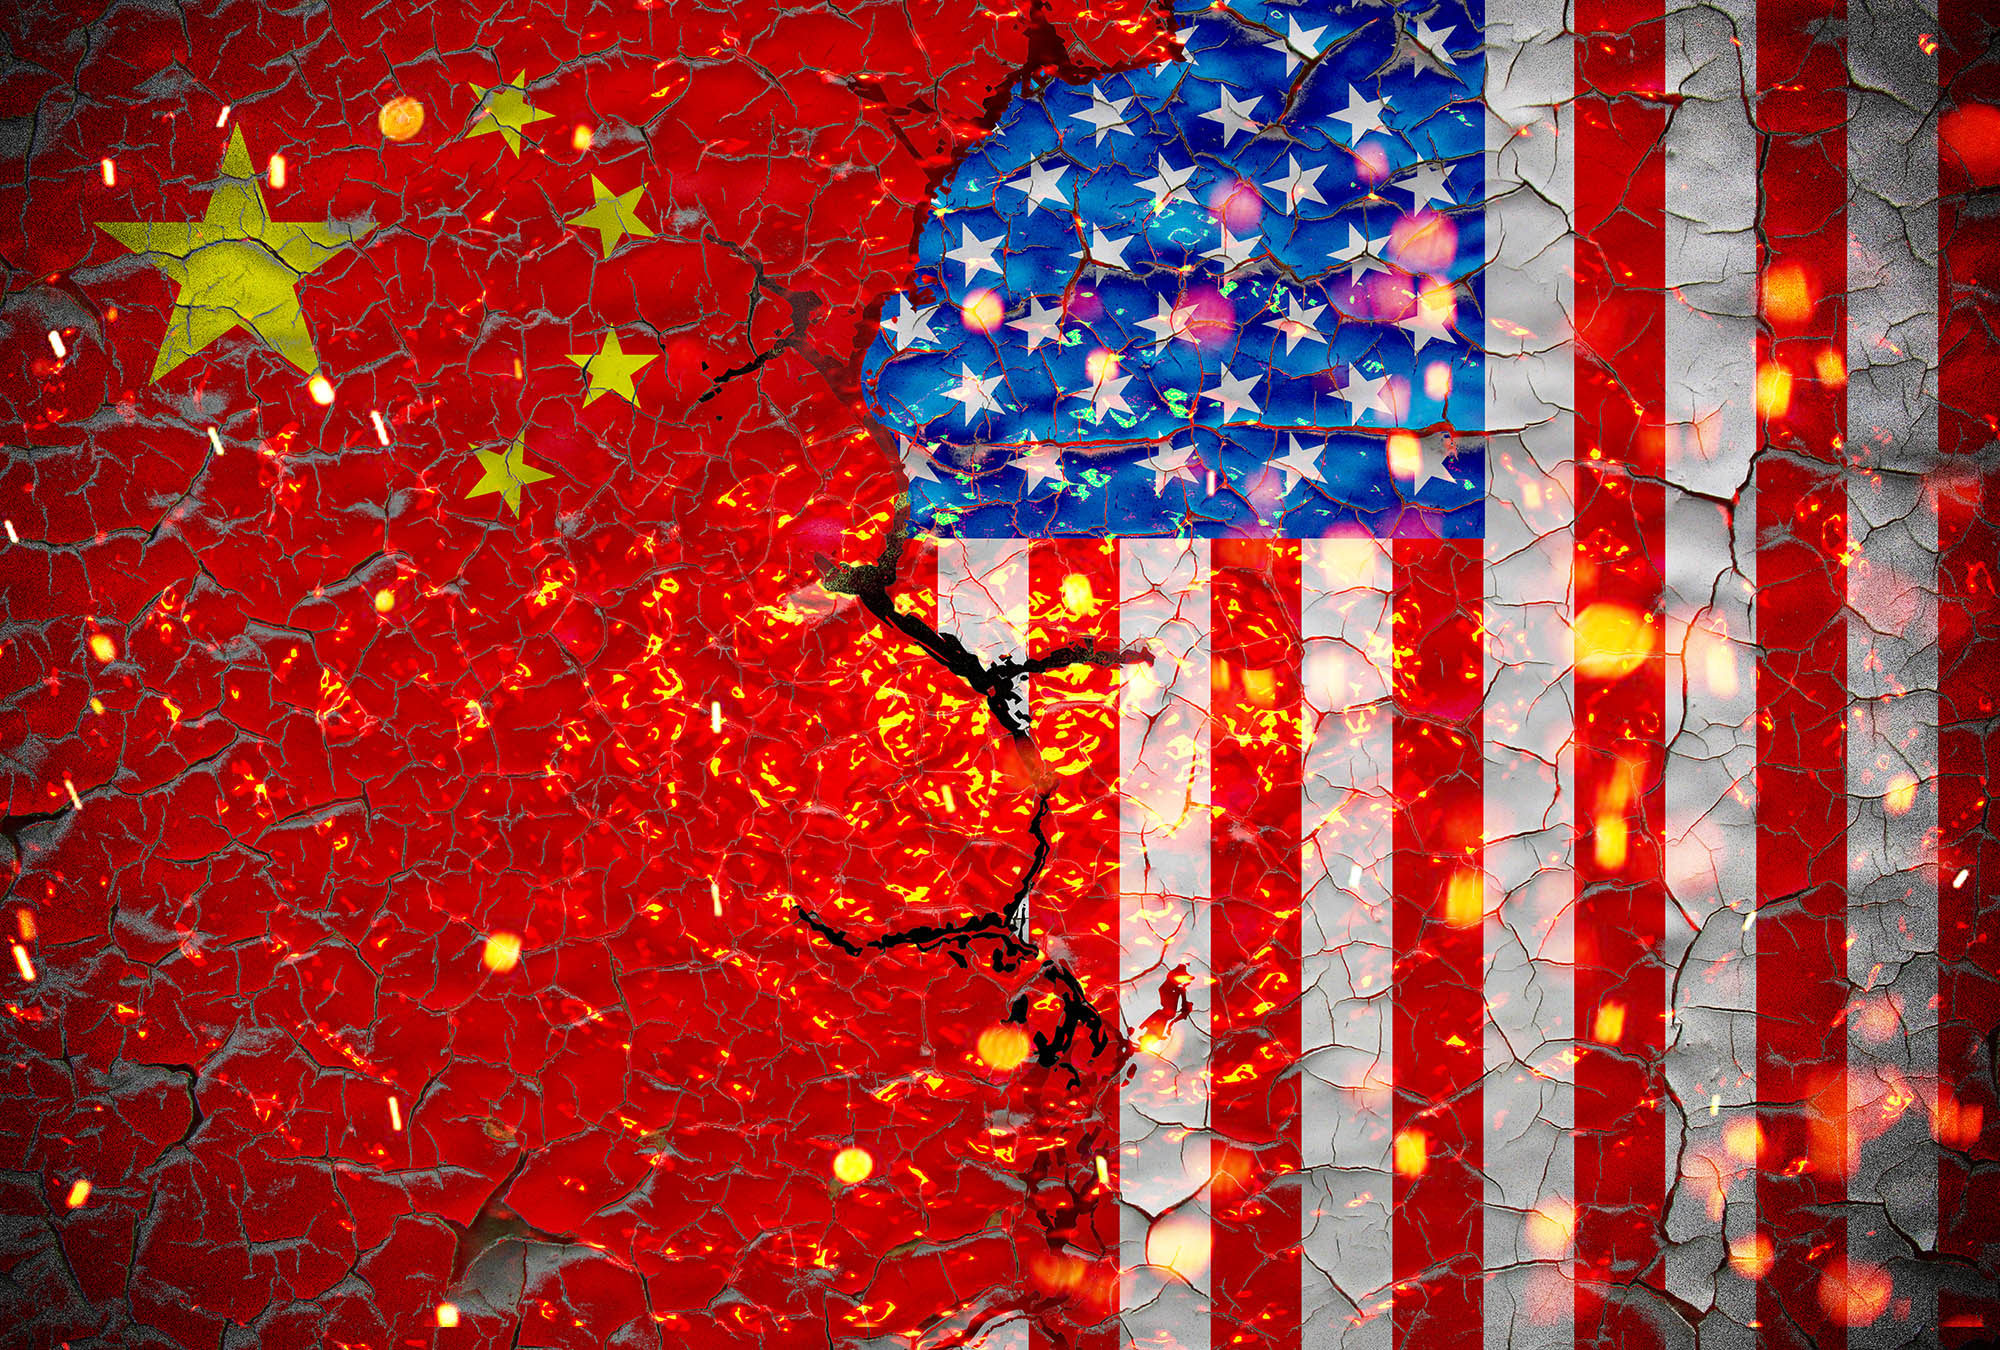 American firms with Chinese operations have turned more pessimistic on bilateral relations between the two countries, according to the latest AmCham survey results. Image: Shutterstock